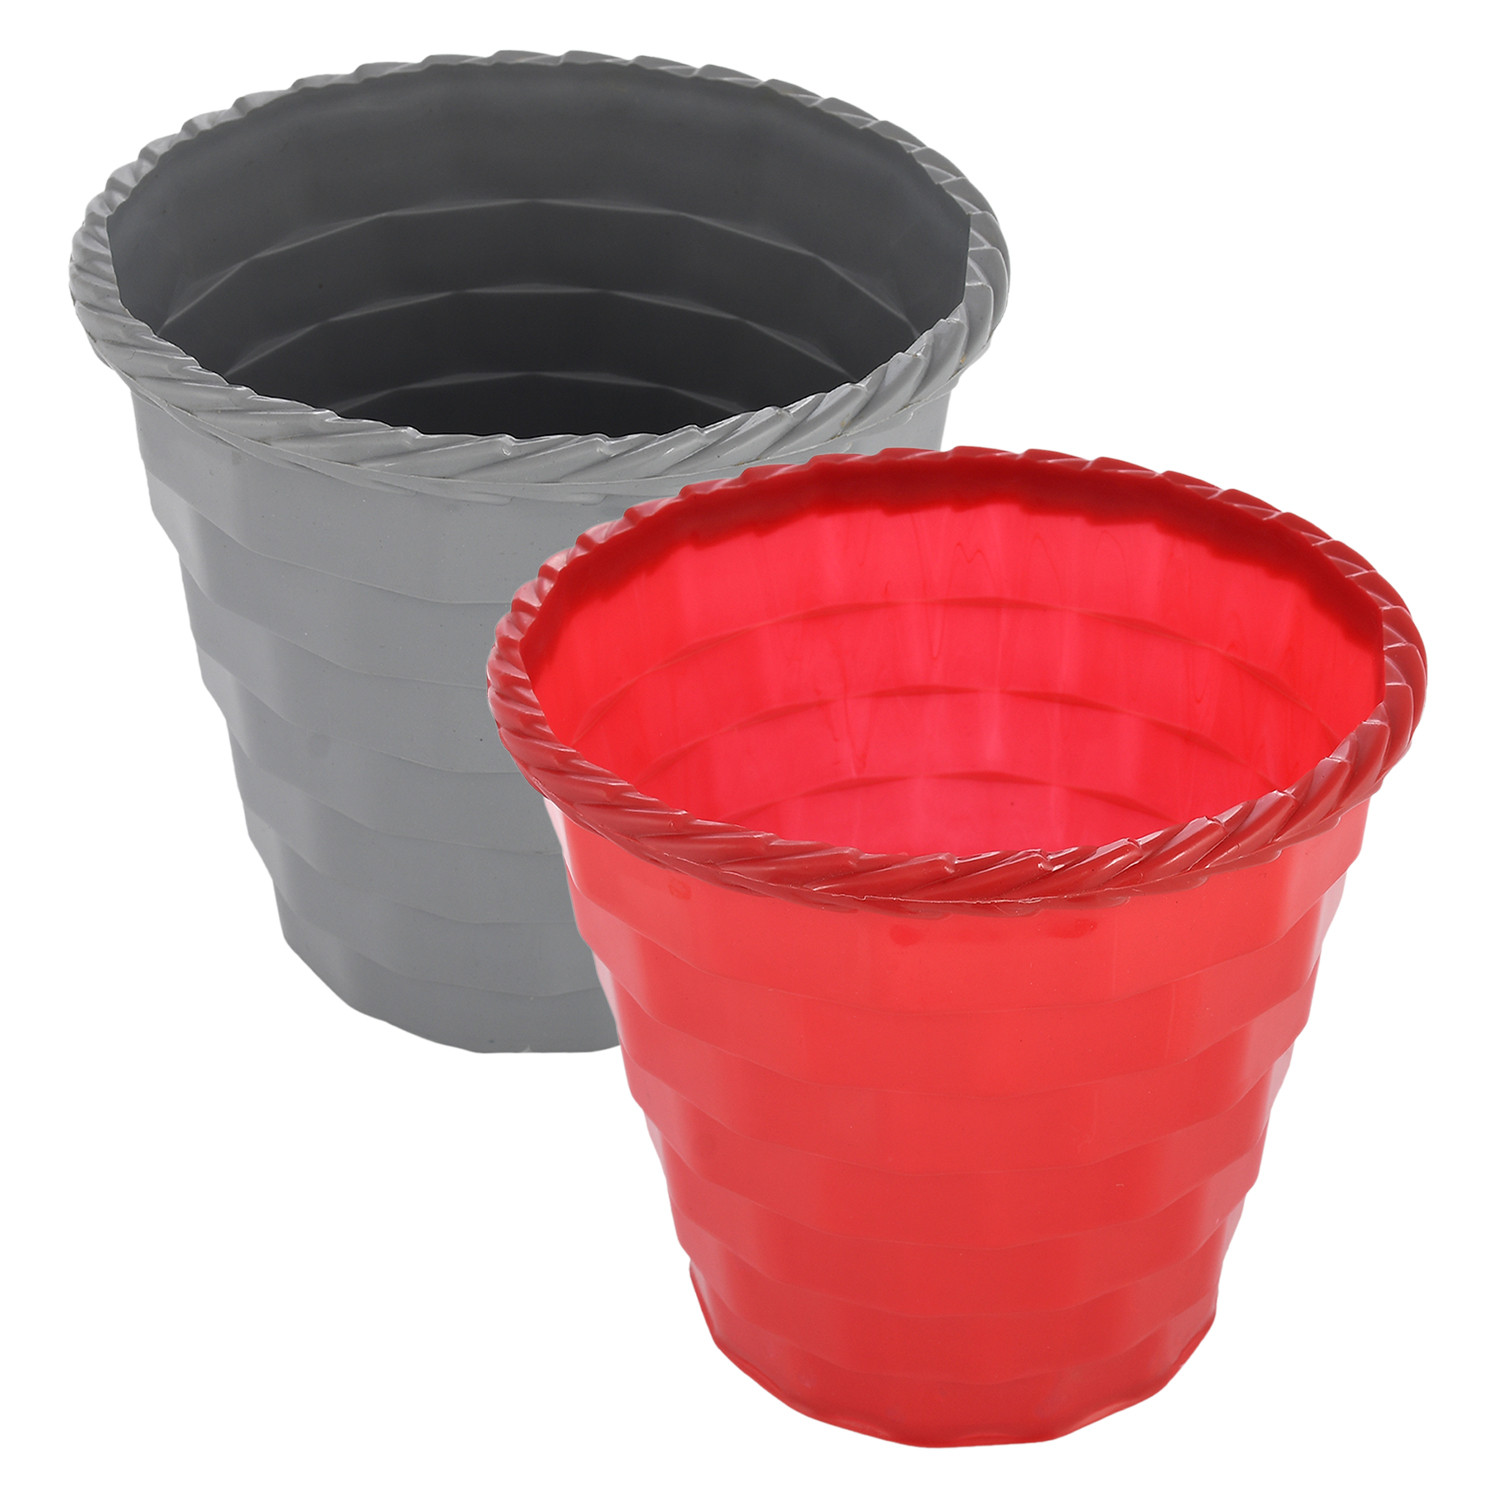 Kuber Industries Brick Flower Pot|Durable Plastic Flower Pots|Planters for Home Décor|Garden|Living Room|Balcony|6 Inch|Pack of 2 (Red & Grey)